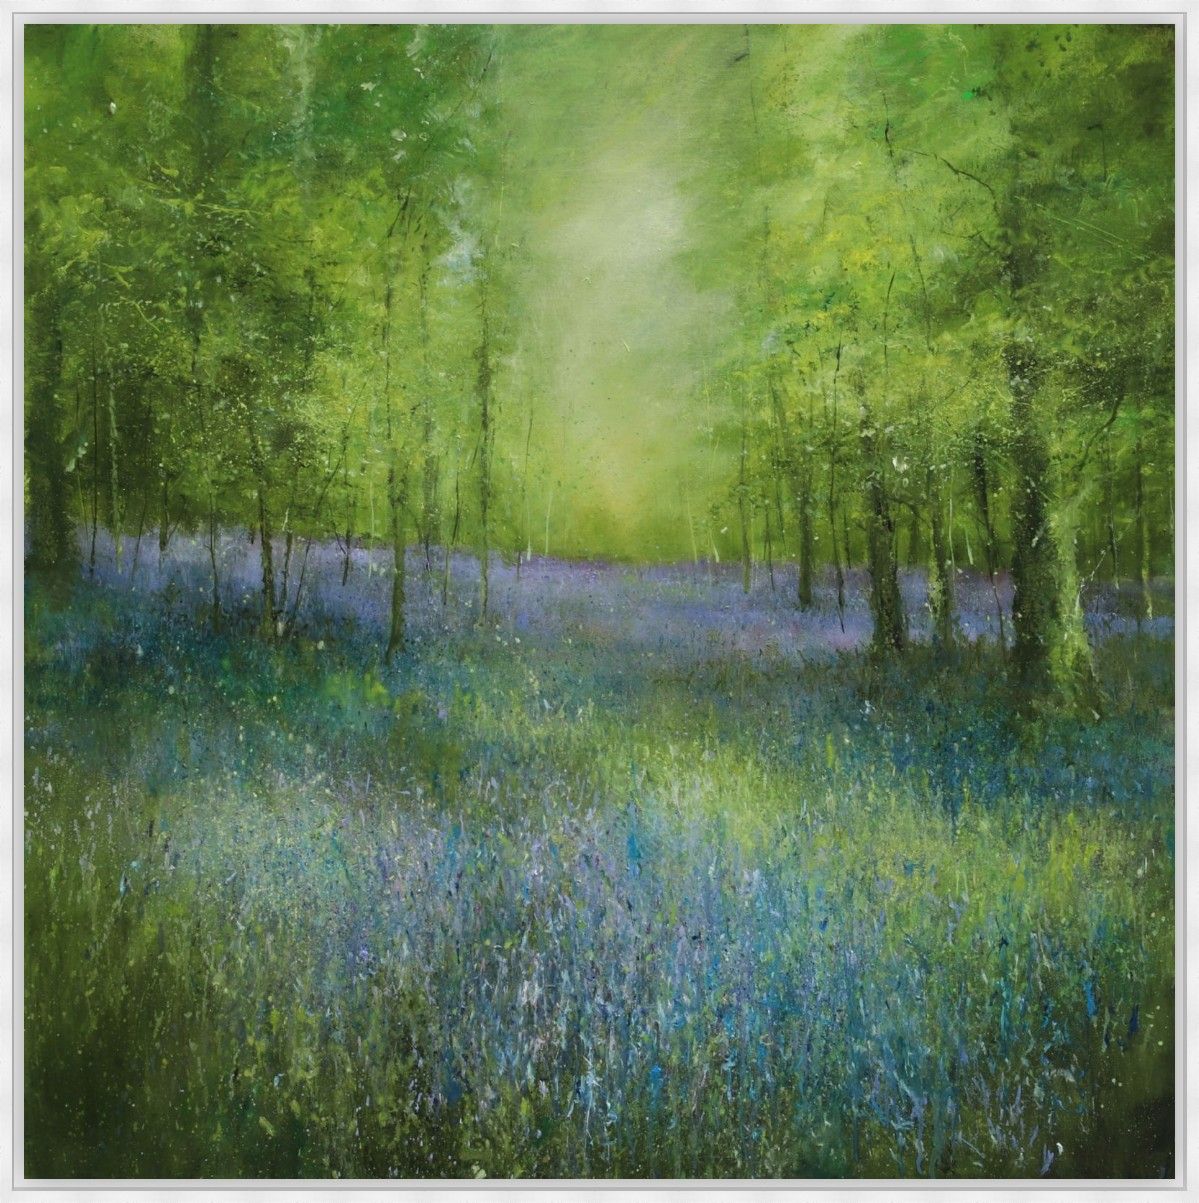 Horizon of Bluebells in the Magic Wood by Garry Pereira